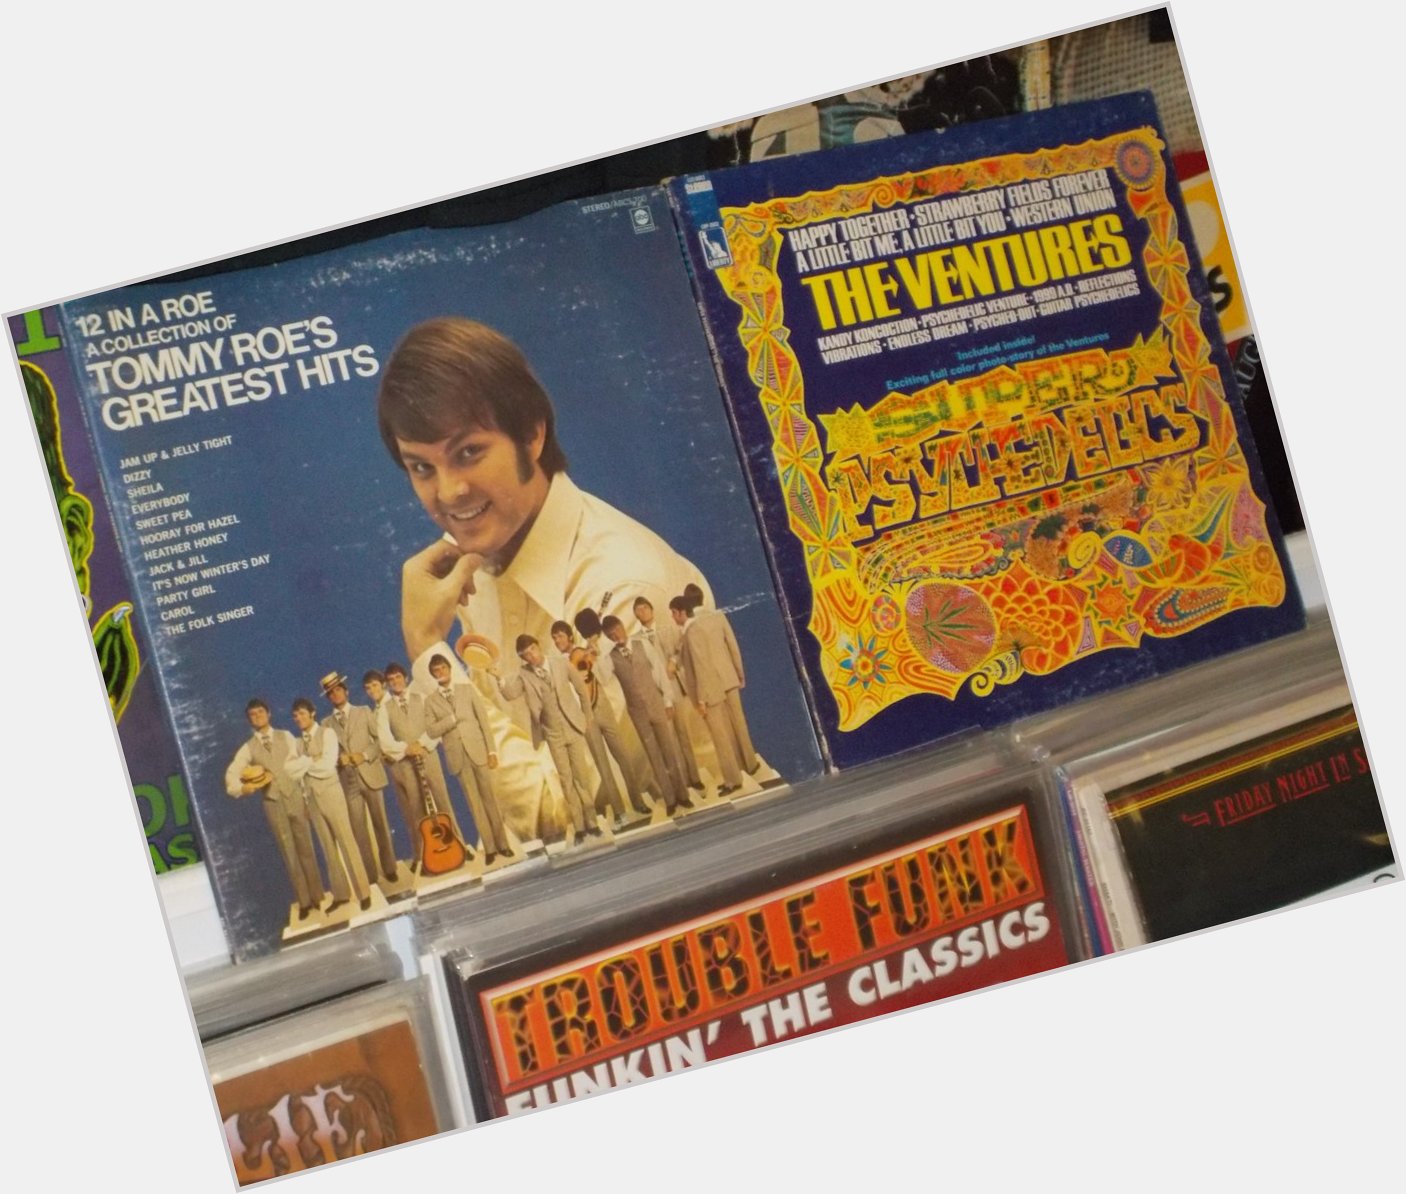 Happy Birthday to Tommy Roe & Nokie Edwards of the Ventures 